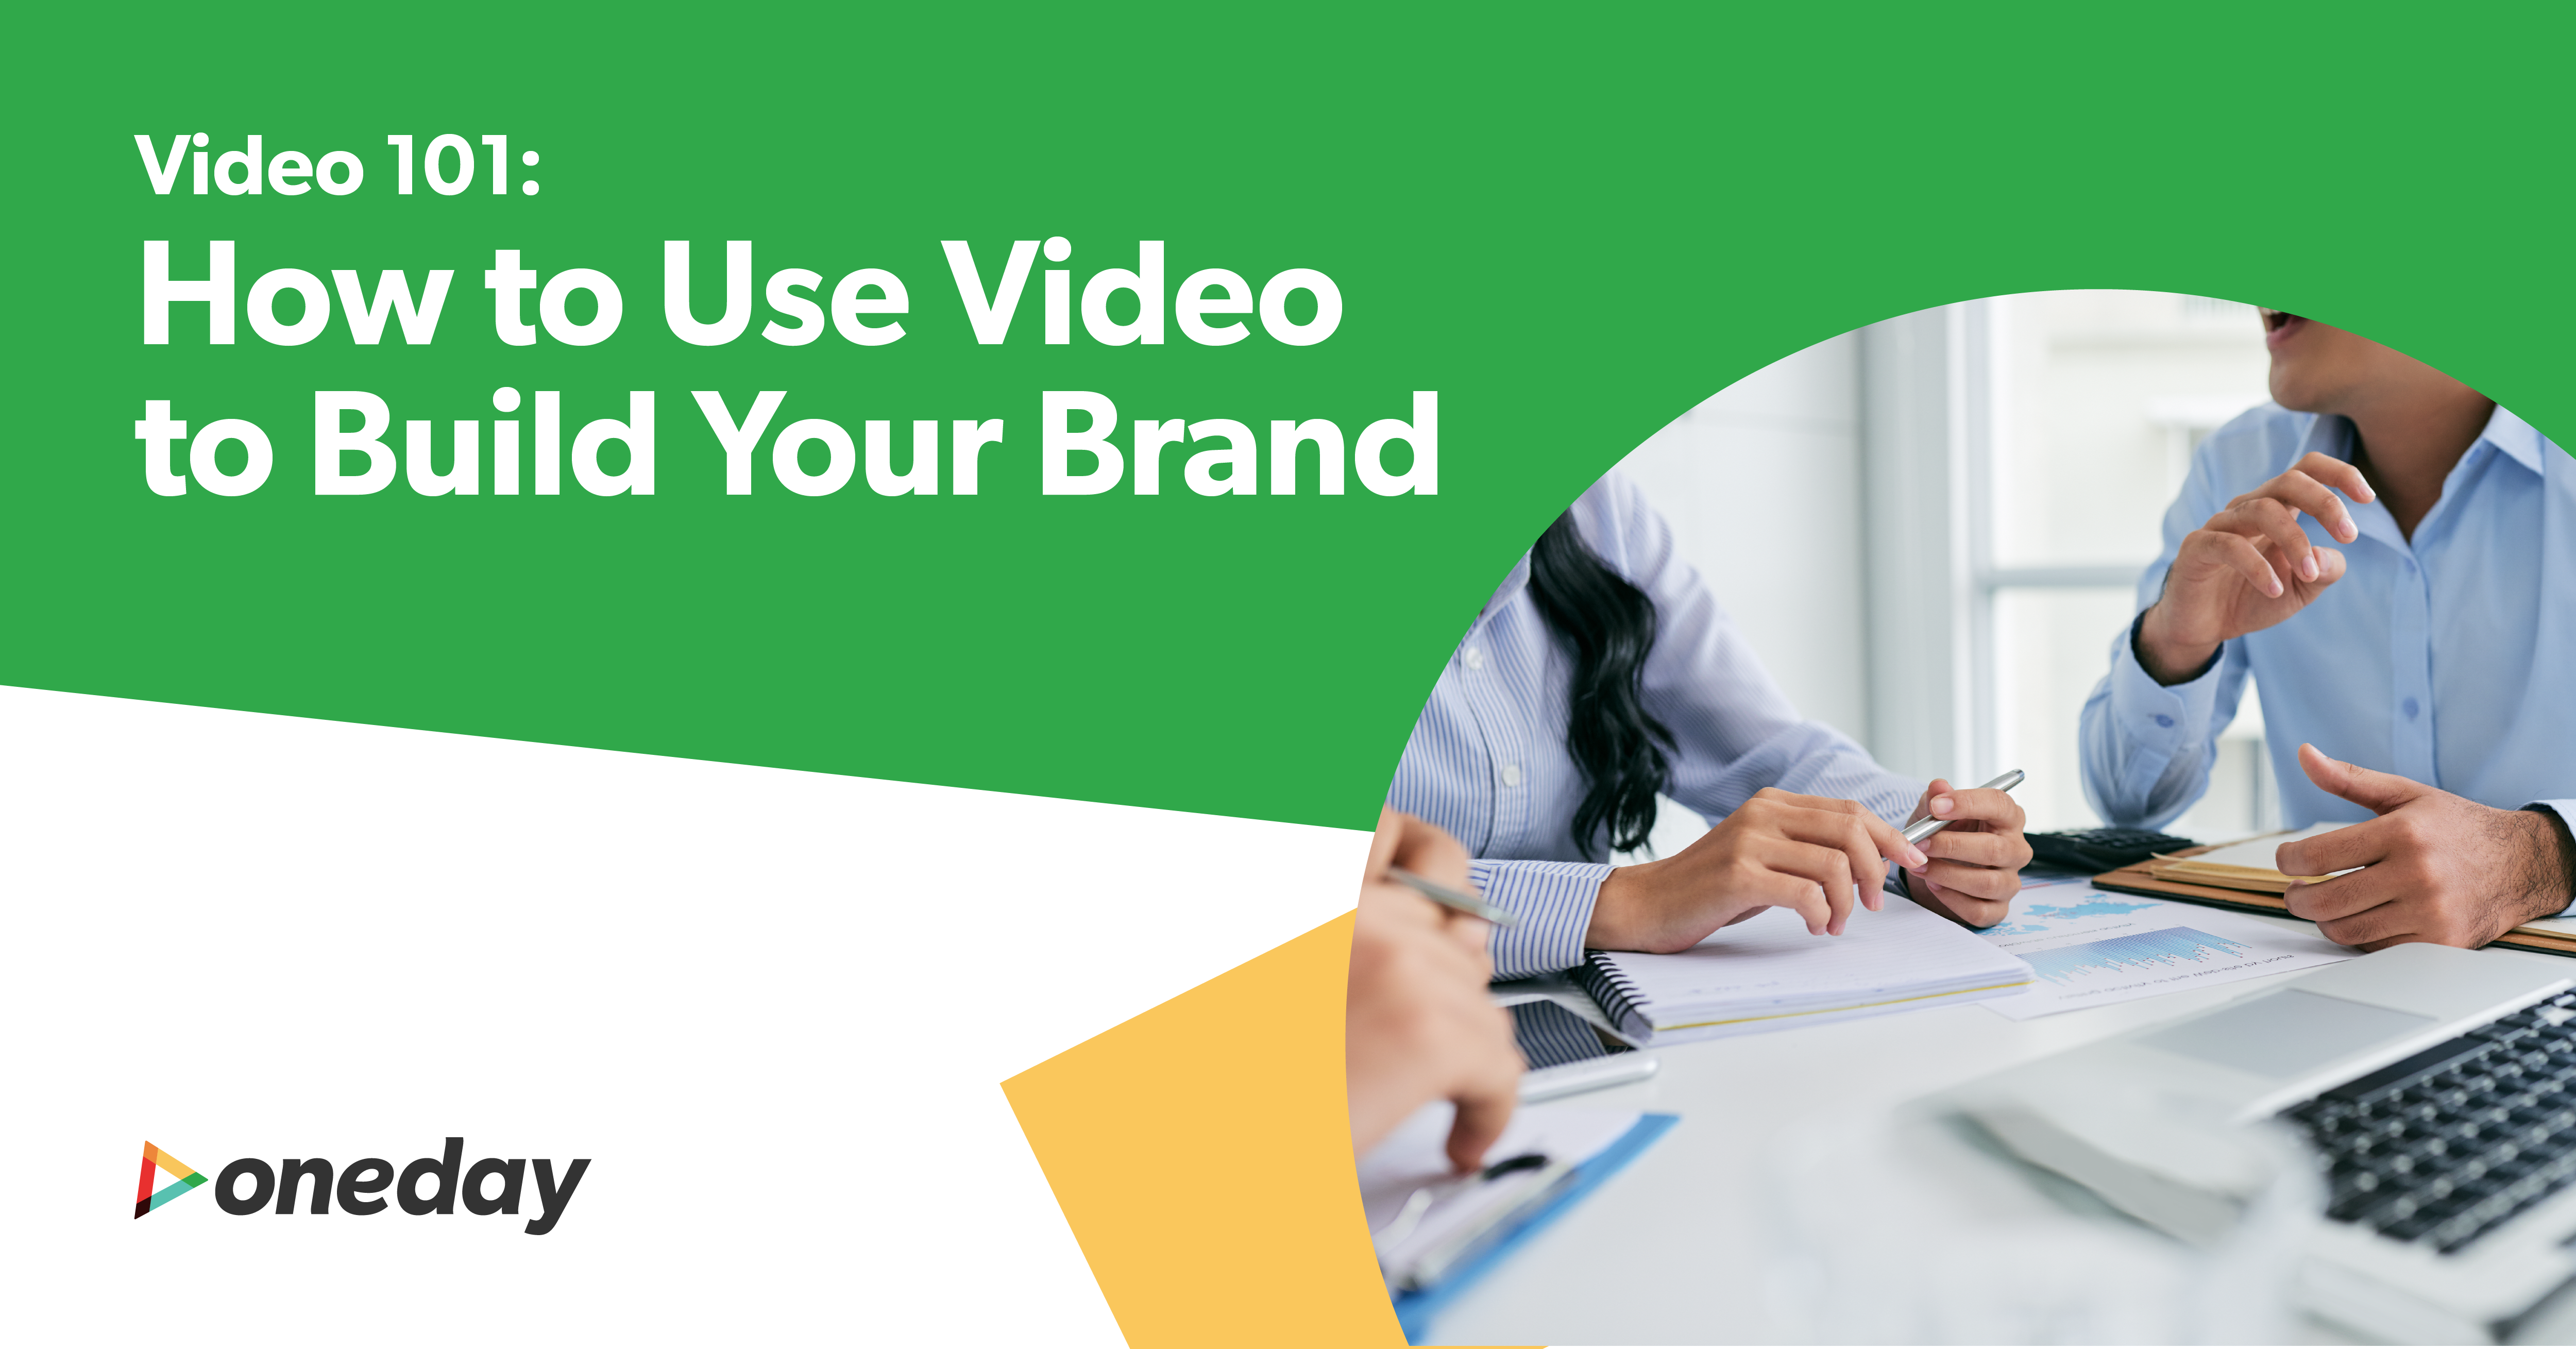 A look at some simple best practices that will help you leverage video content to develop, strengthen, and expand your brand, no matter your industry.